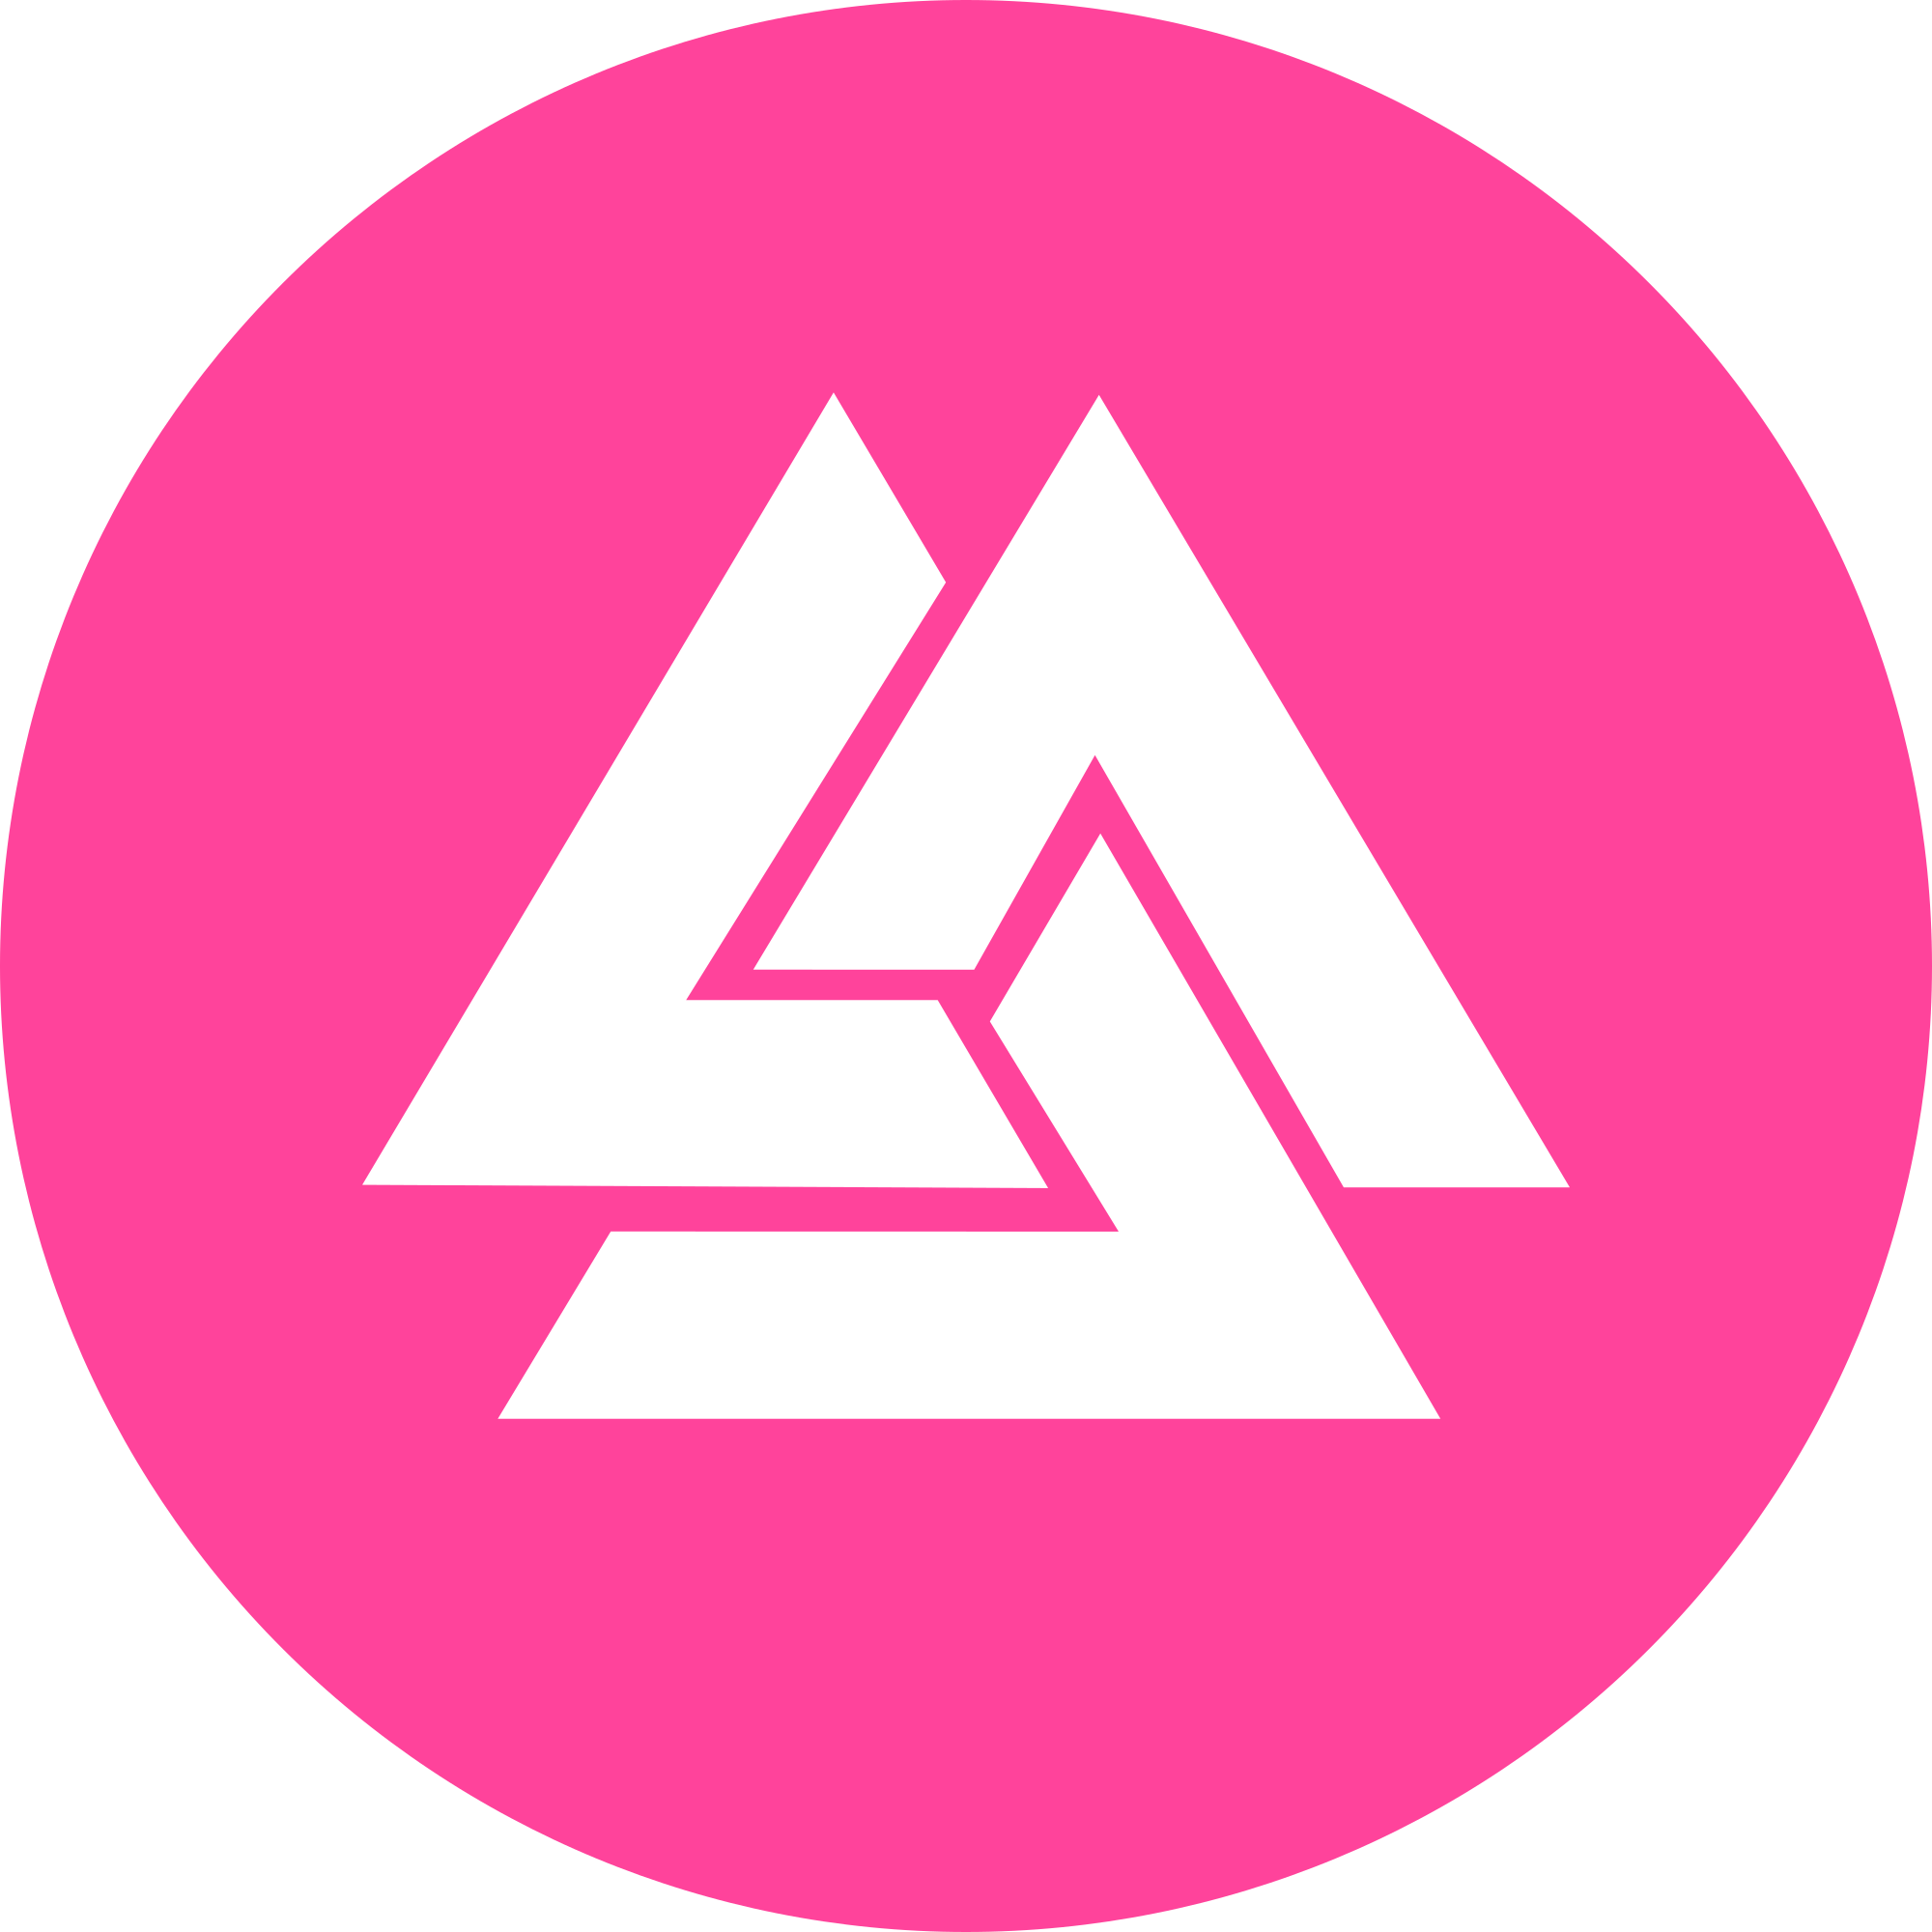 A White Triangle In A Pink Circle